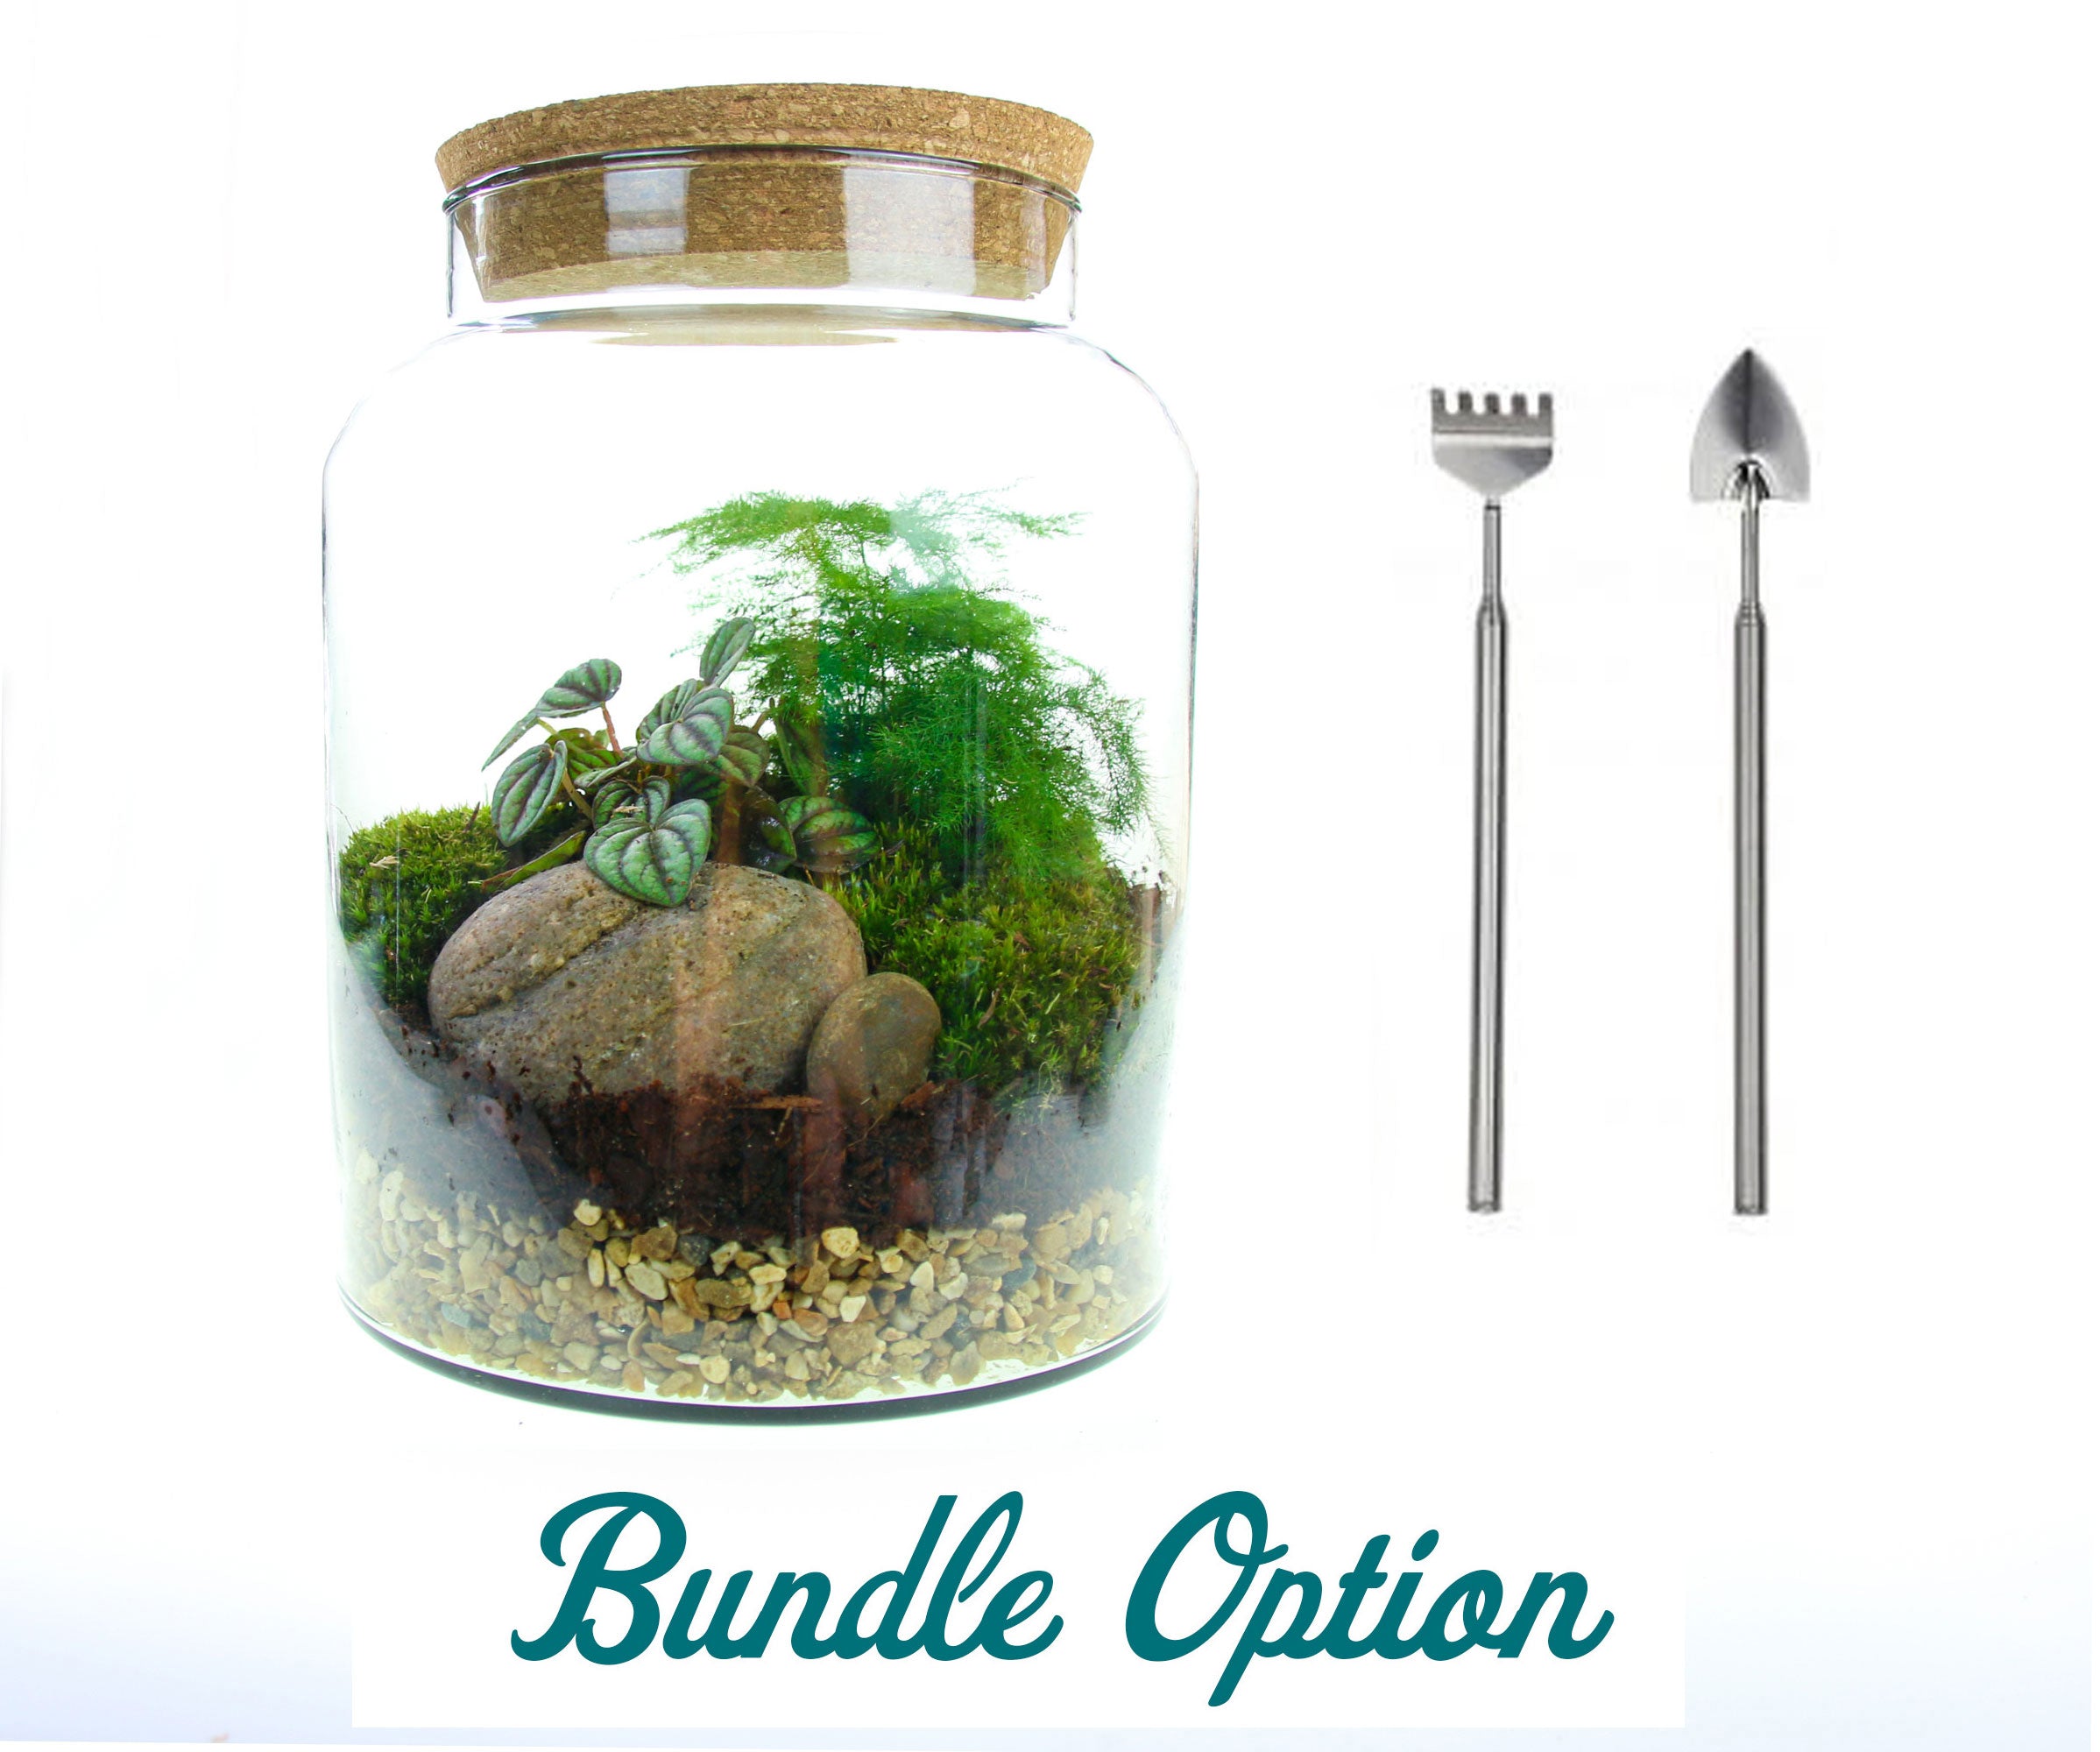 Complete Terrarium kit with telescopic tools, living moss and real plants